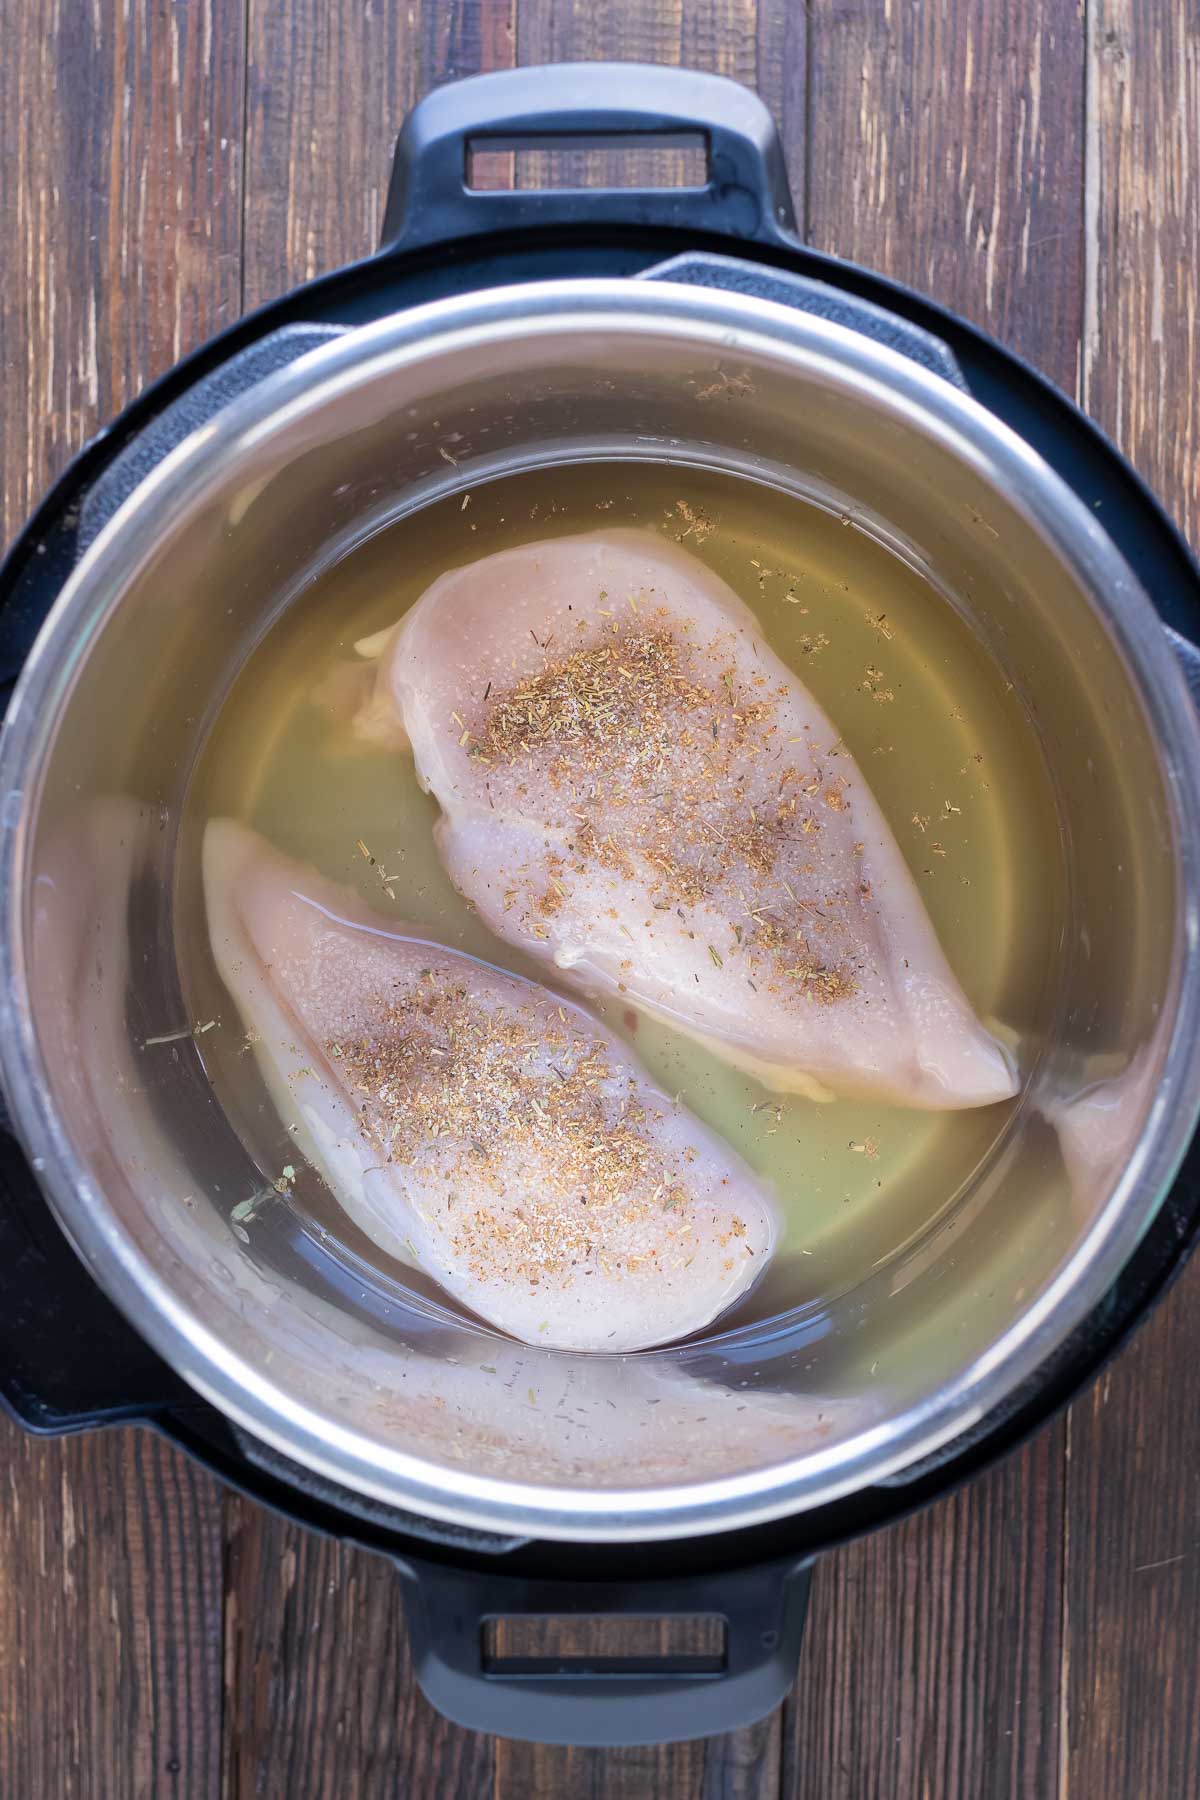 Chicken and seasonings are added to the oil in the Instant Pot.